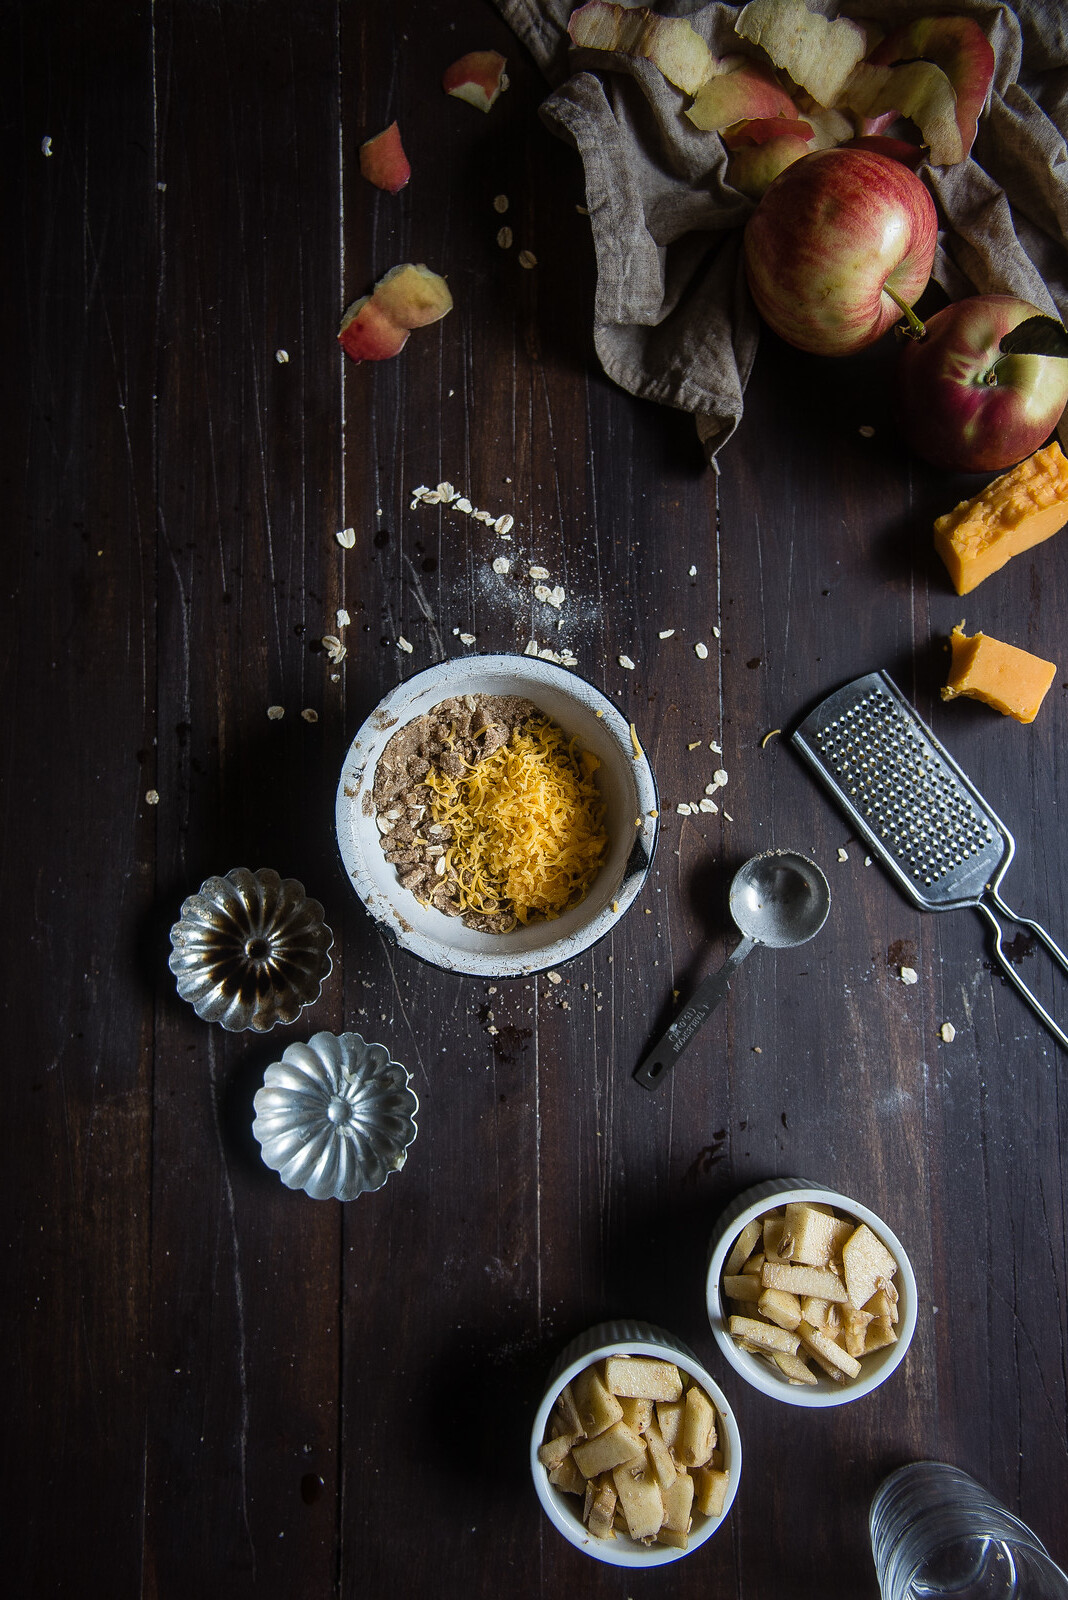 Brown butter cheddar apple crumbles for two, for Verily Magazine.